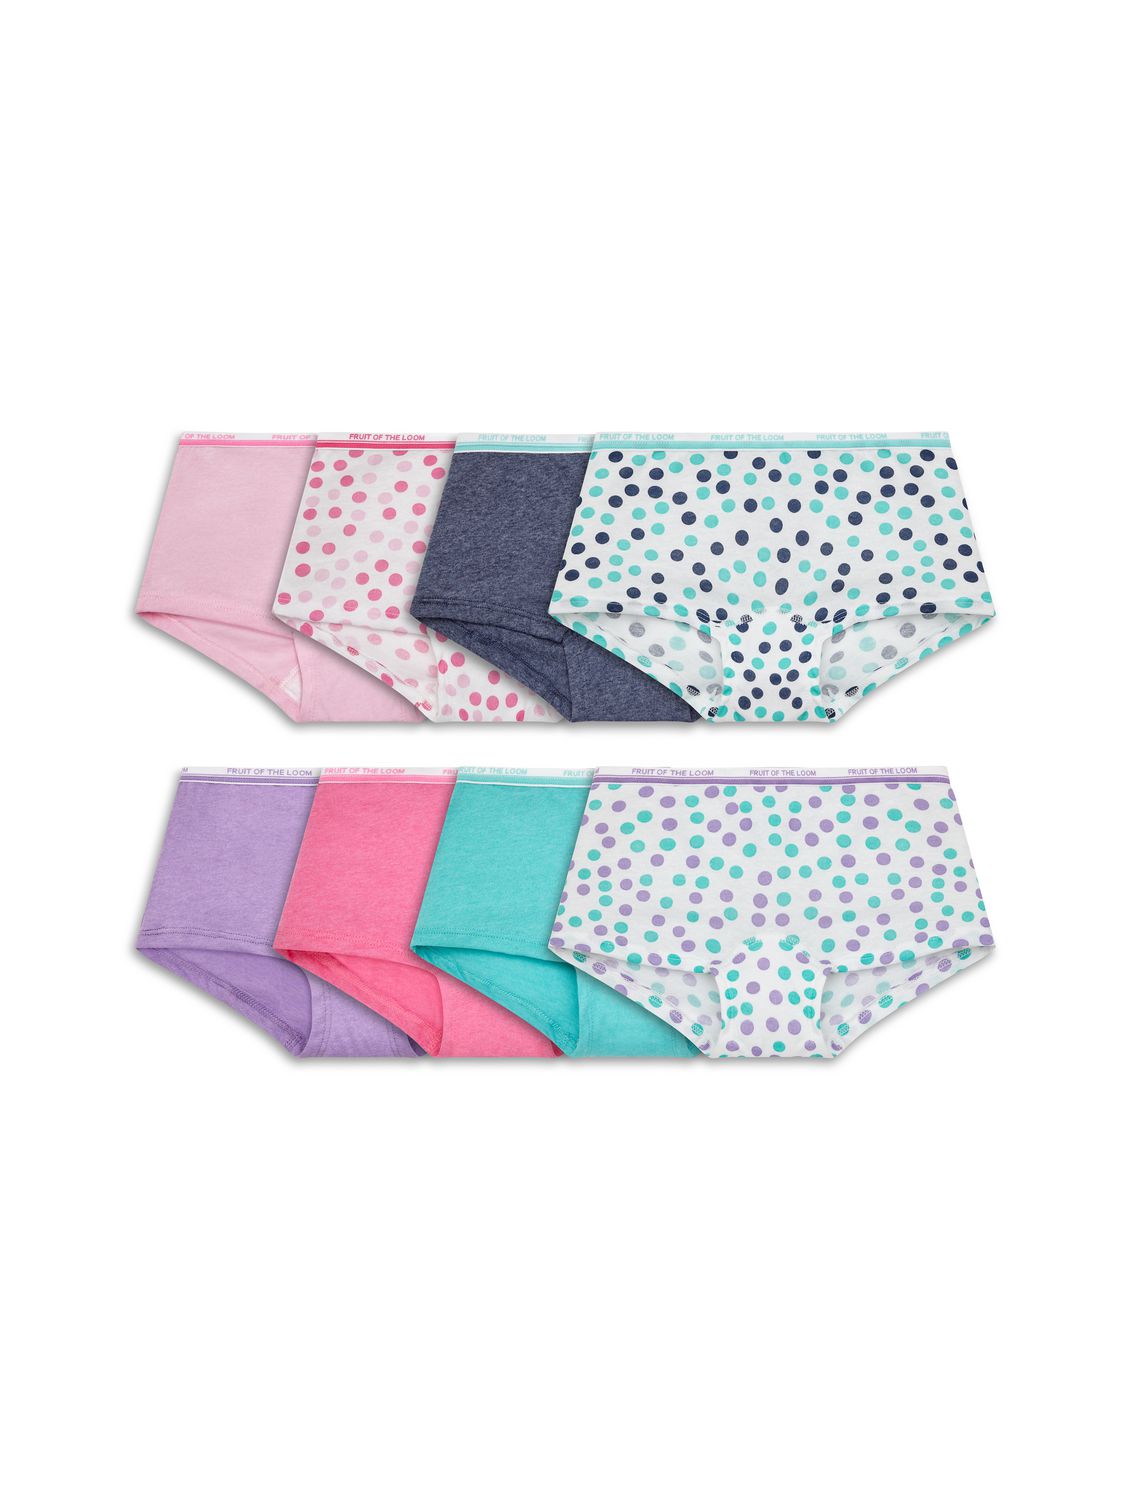 Fruit of the Loom Pink Bottoms for Girls Sizes (4+)